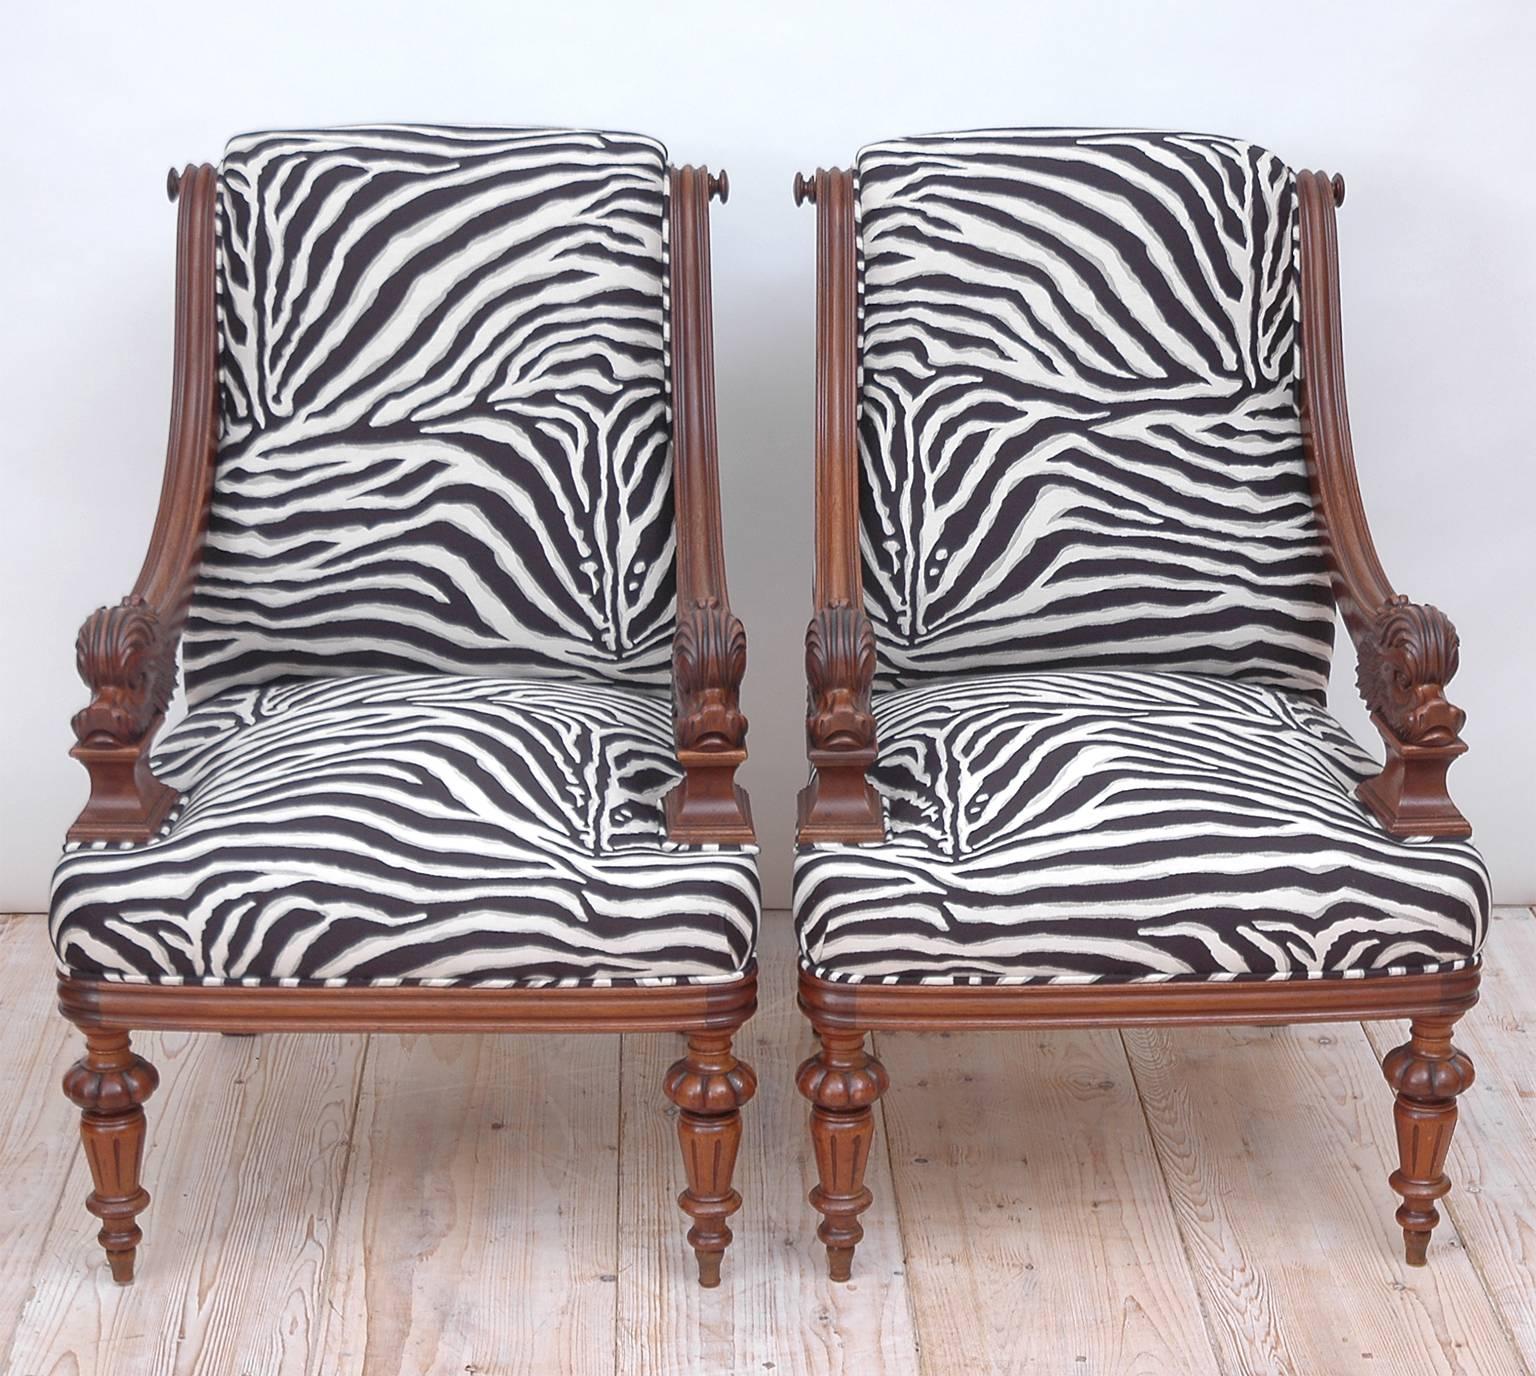 A pair of Napoleon III bergères in walnut with carved dolphins as armrests, turned and carved legs and upholstery on seat & scrolled back with finials along corners of frame. Newly upholstered in Robert Allen cotton 